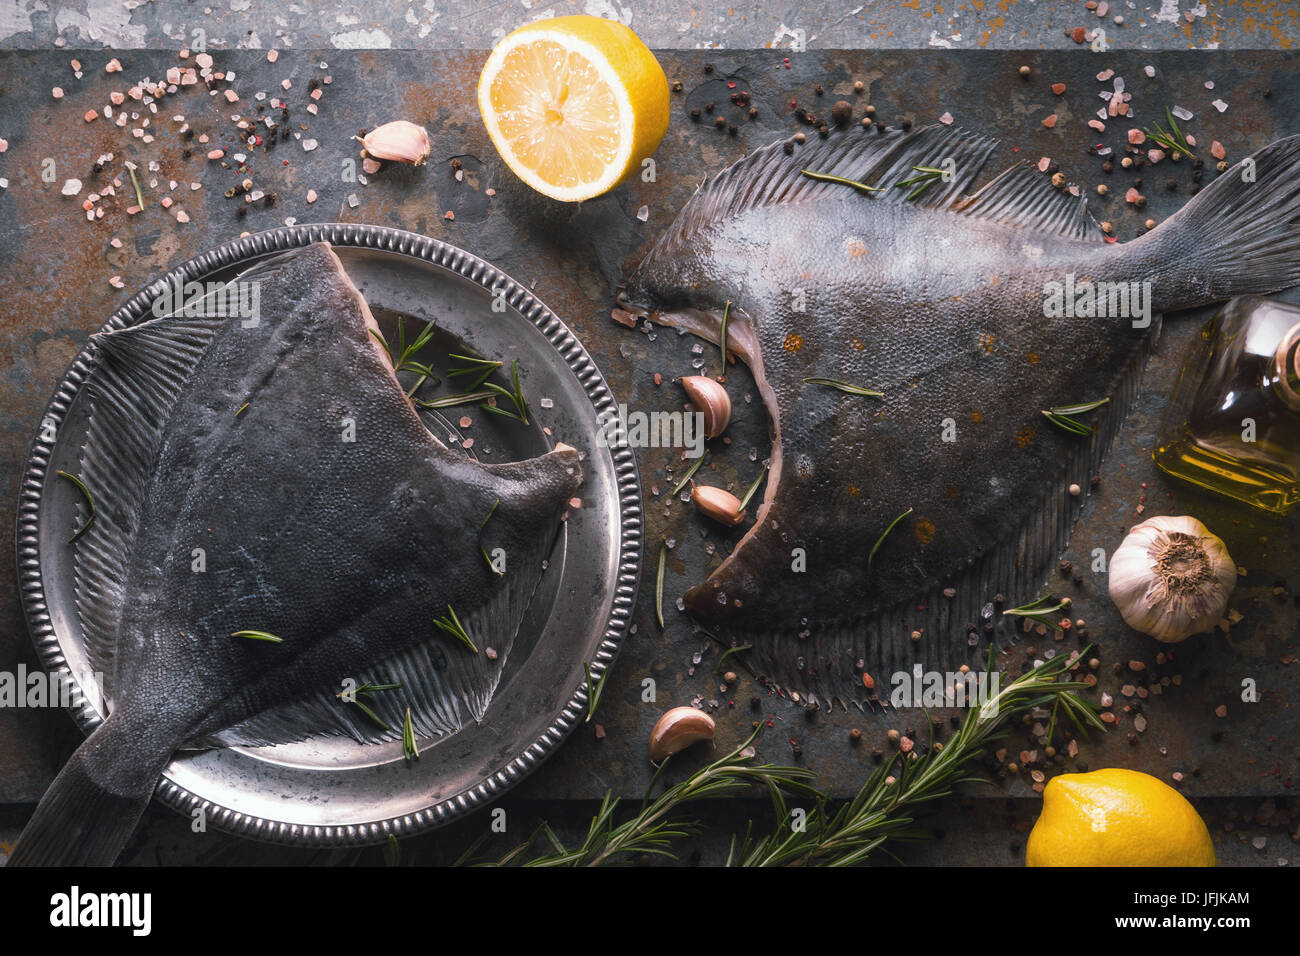 Raw flounders with different seasoning on the stone horizontal Stock Photo